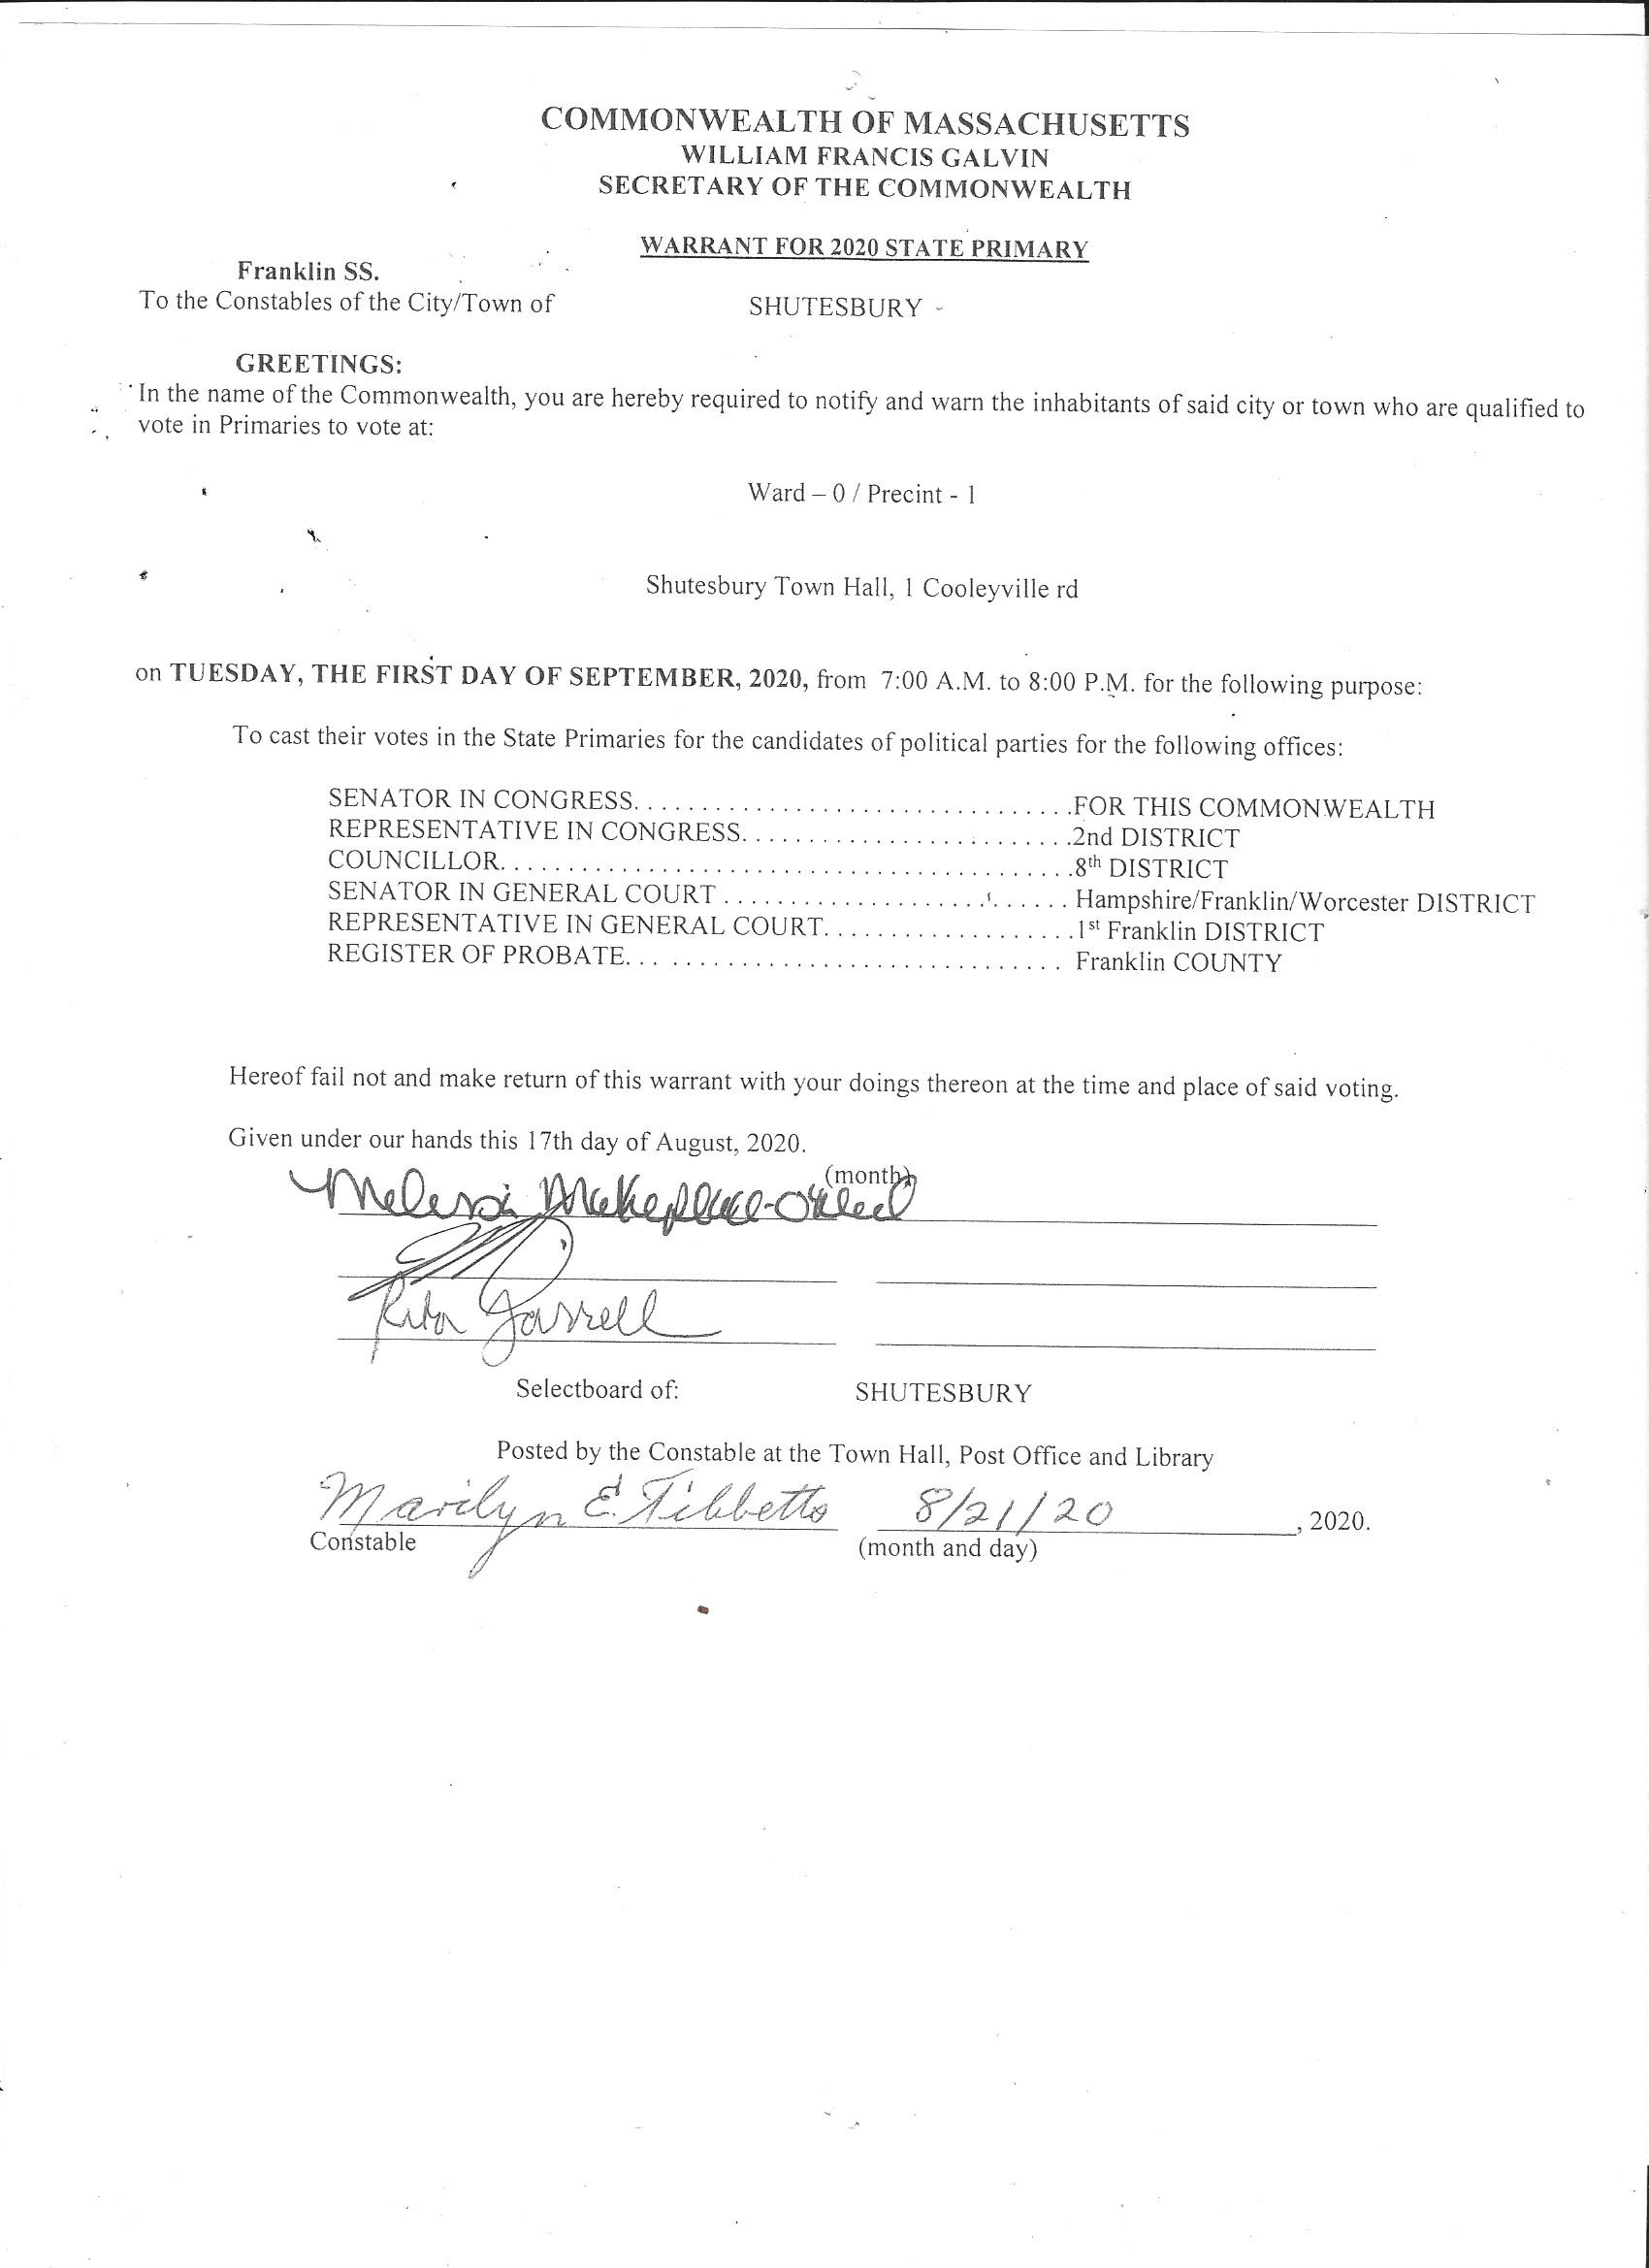 An image of the official September Primary 2020 Election Warrant from the Town of Shutesbury